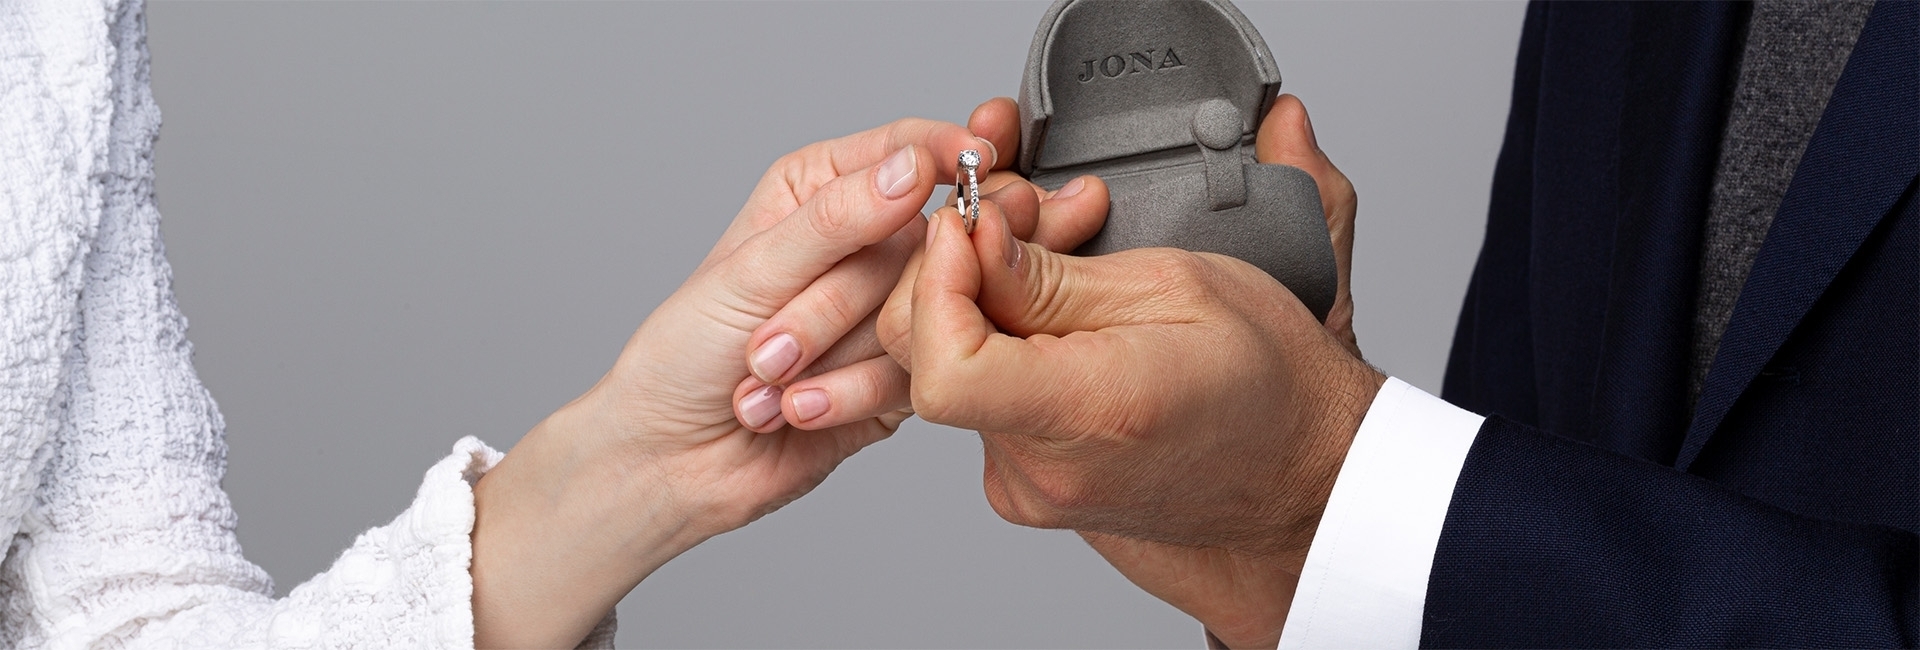 Engagement rings - Gifts for engagement - Alex Jona Jewelry